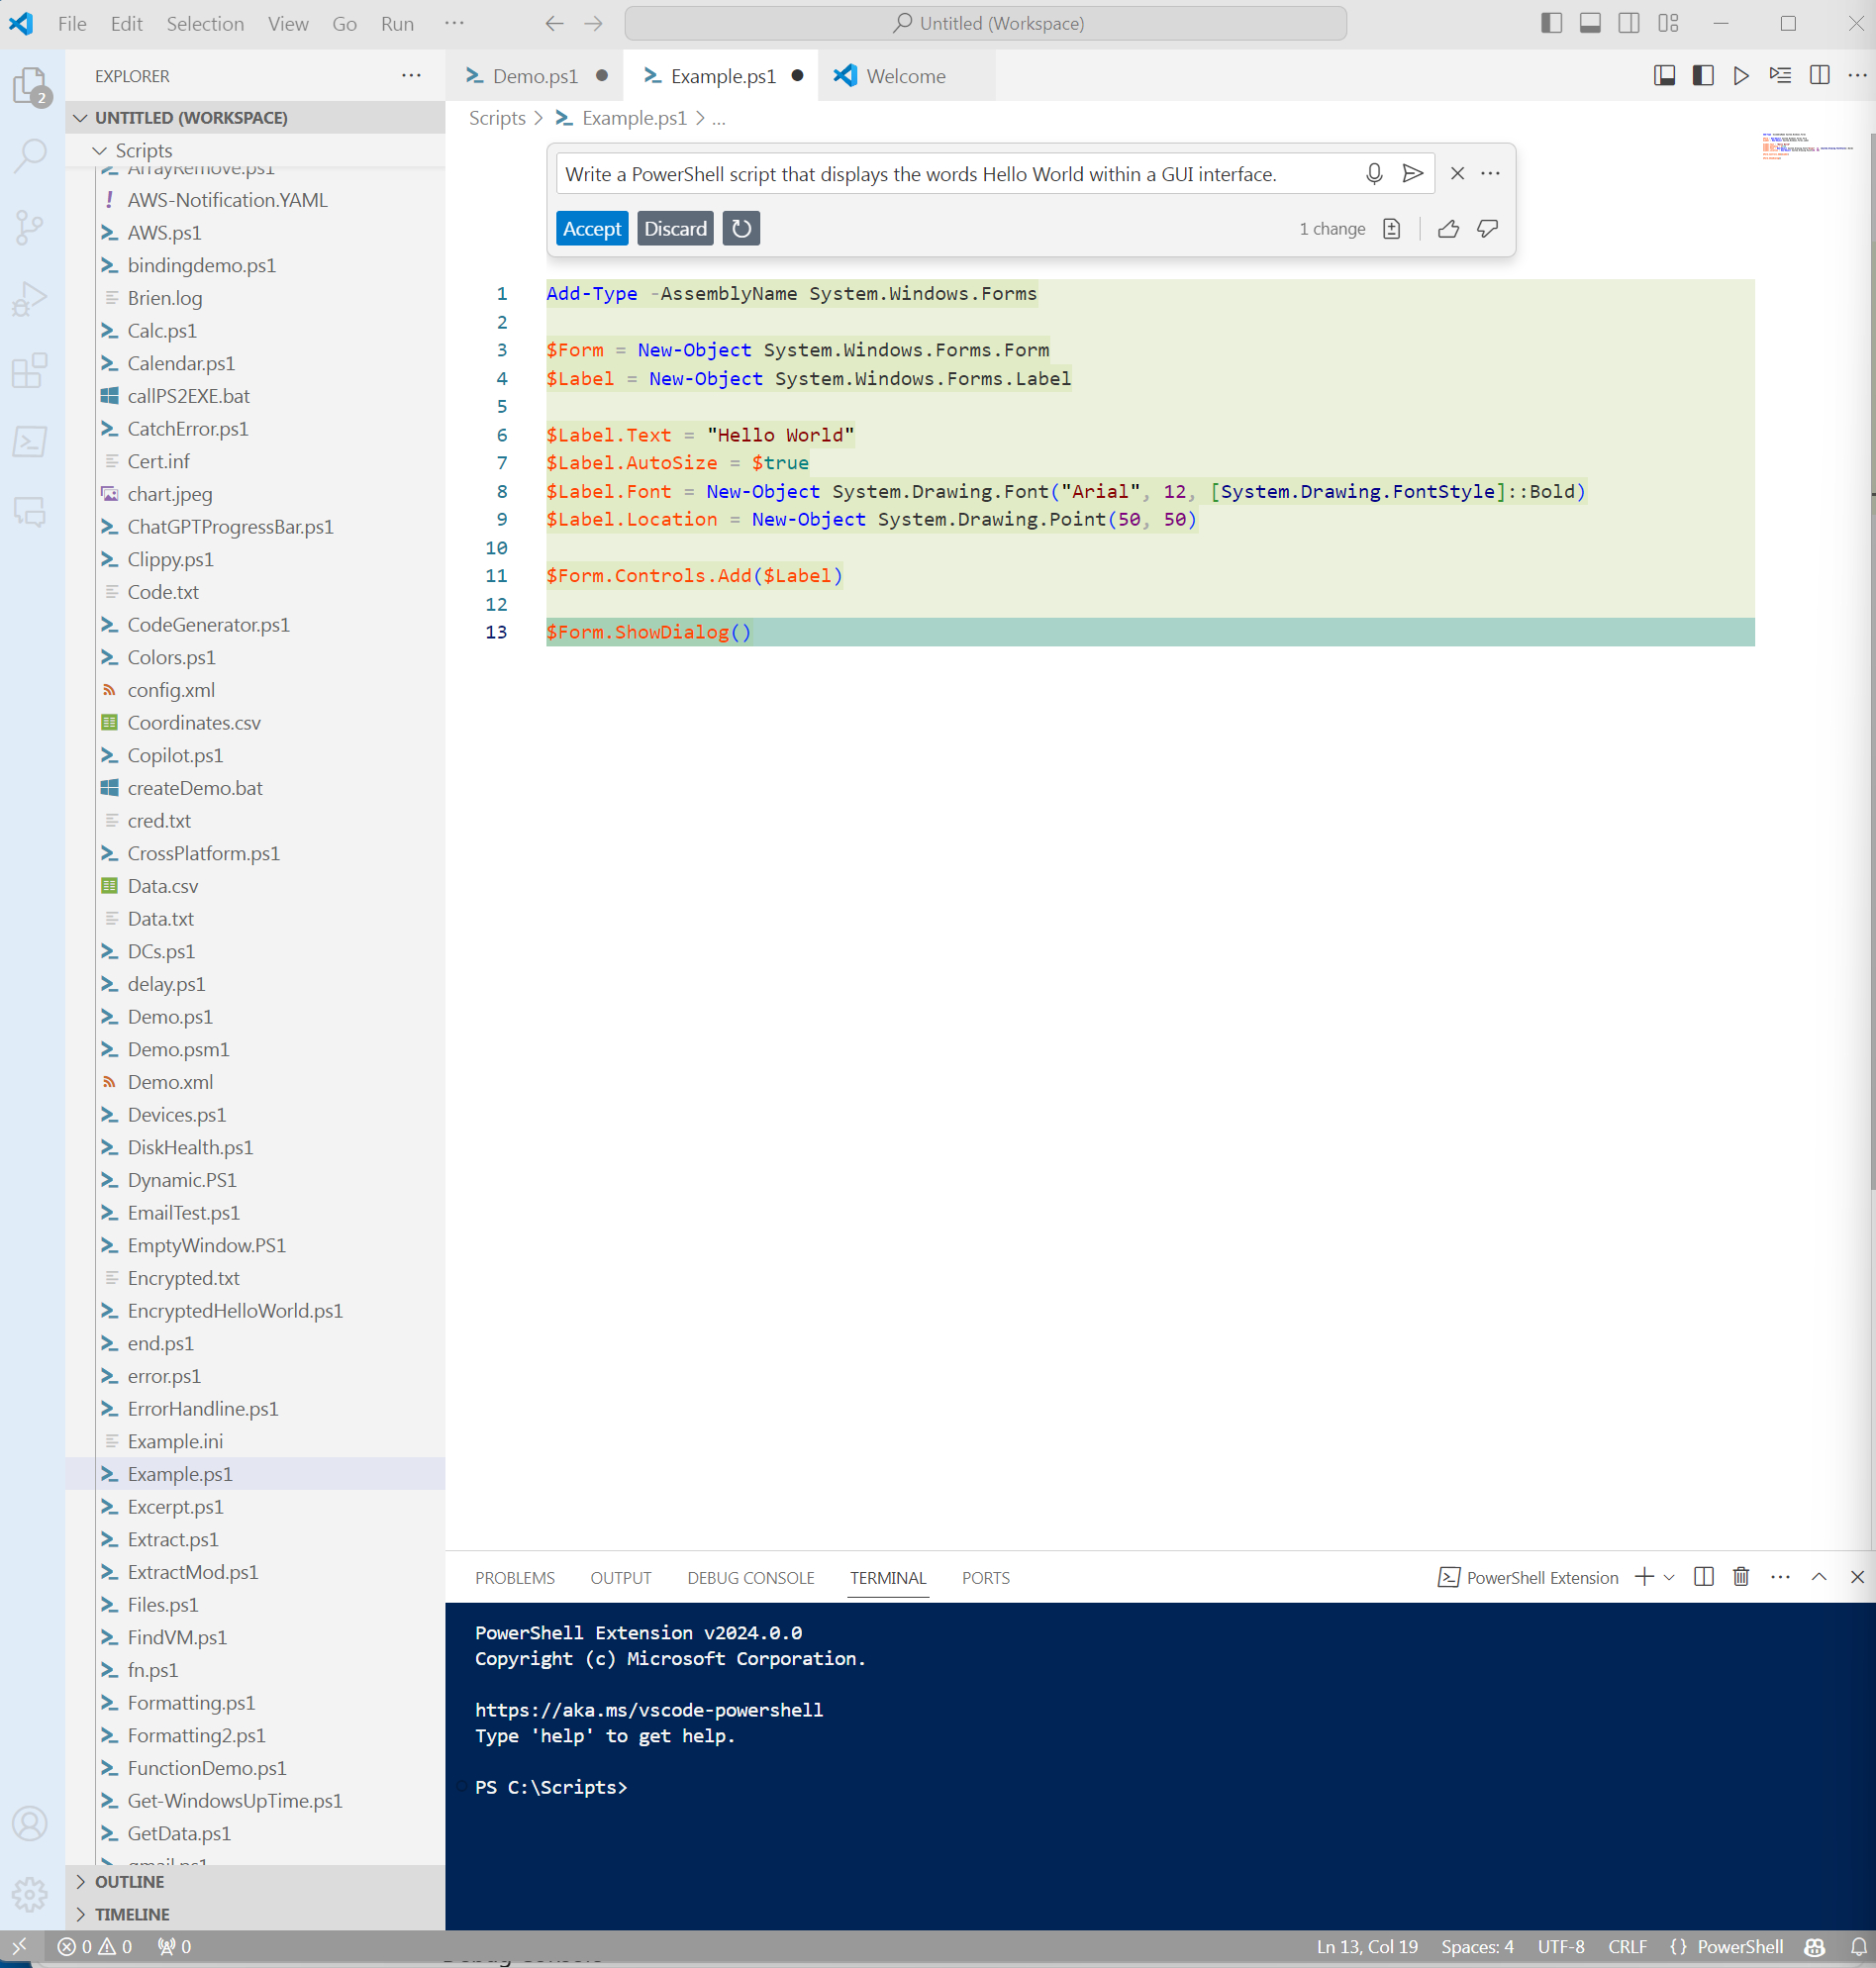 A screenshot shows a PowerShell script generated by GitHub Copilot